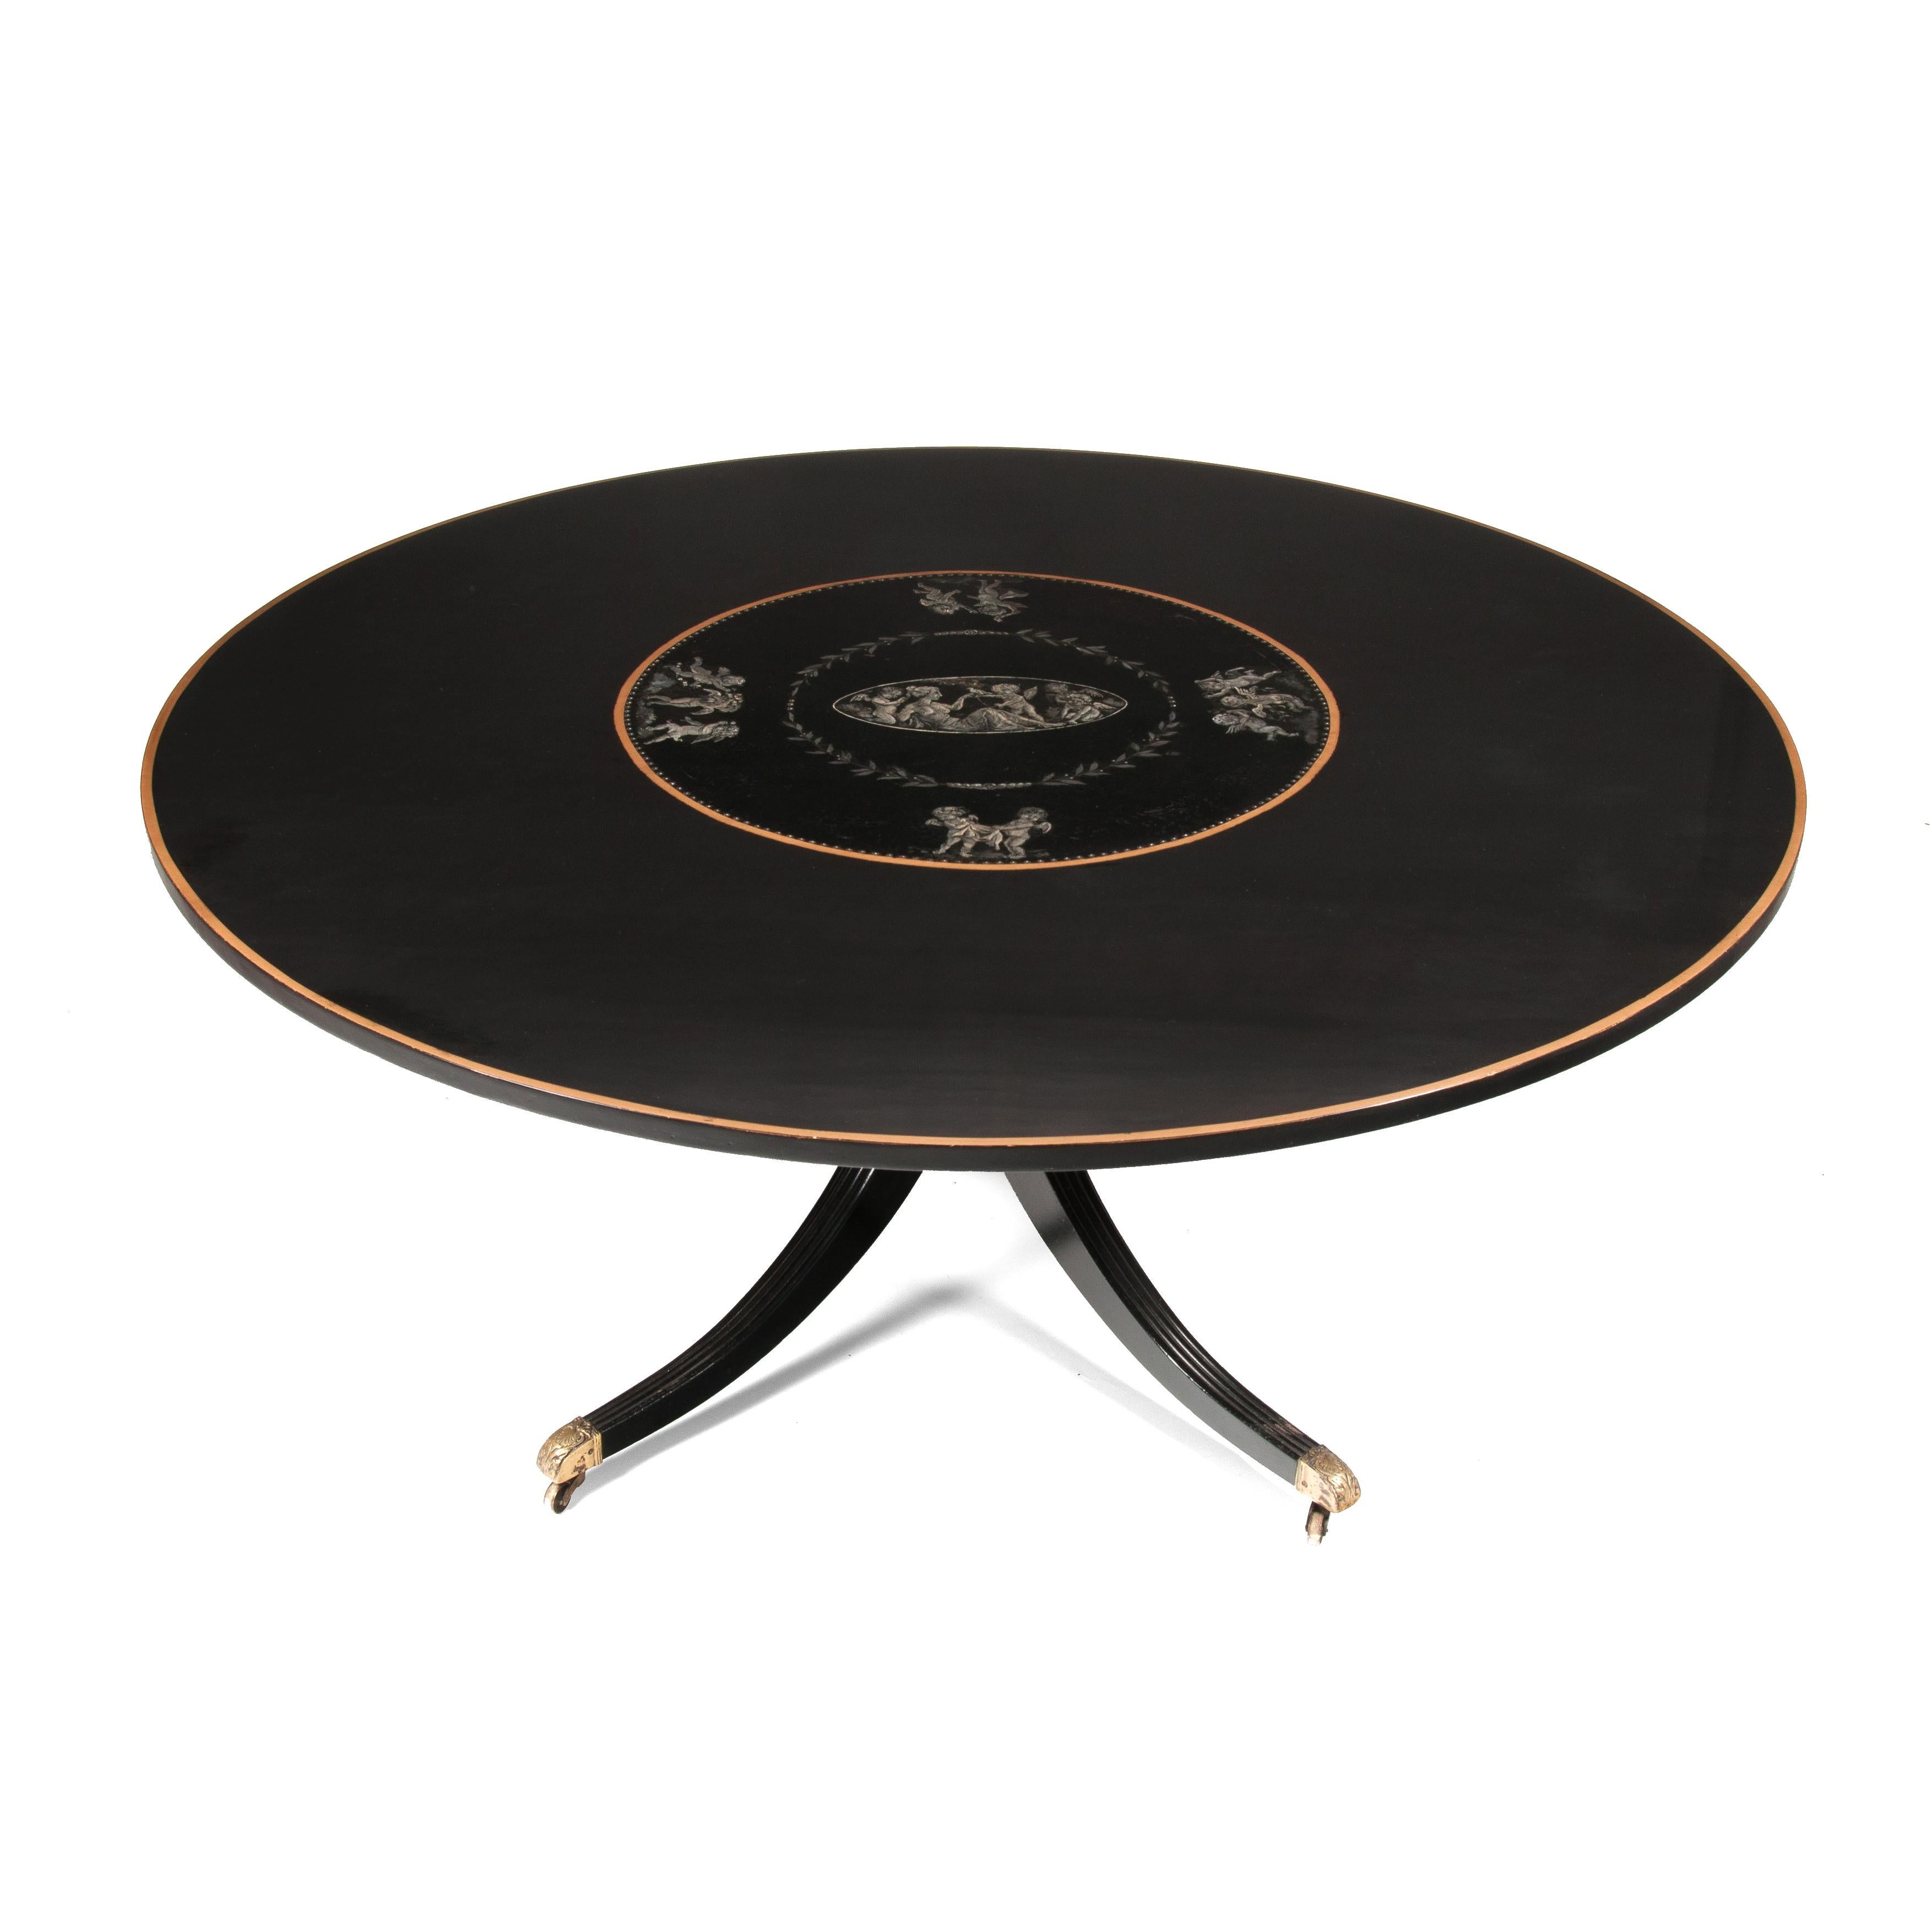 A large 5 1/2 feet diameter circular mid-20th century ebonized, gilt and painted Hollywood Regency style dining table on central splay base circa 1960s-1970s. 

English, circa 1960s-1970s.

The large 66 inch diameter top having a hand painted